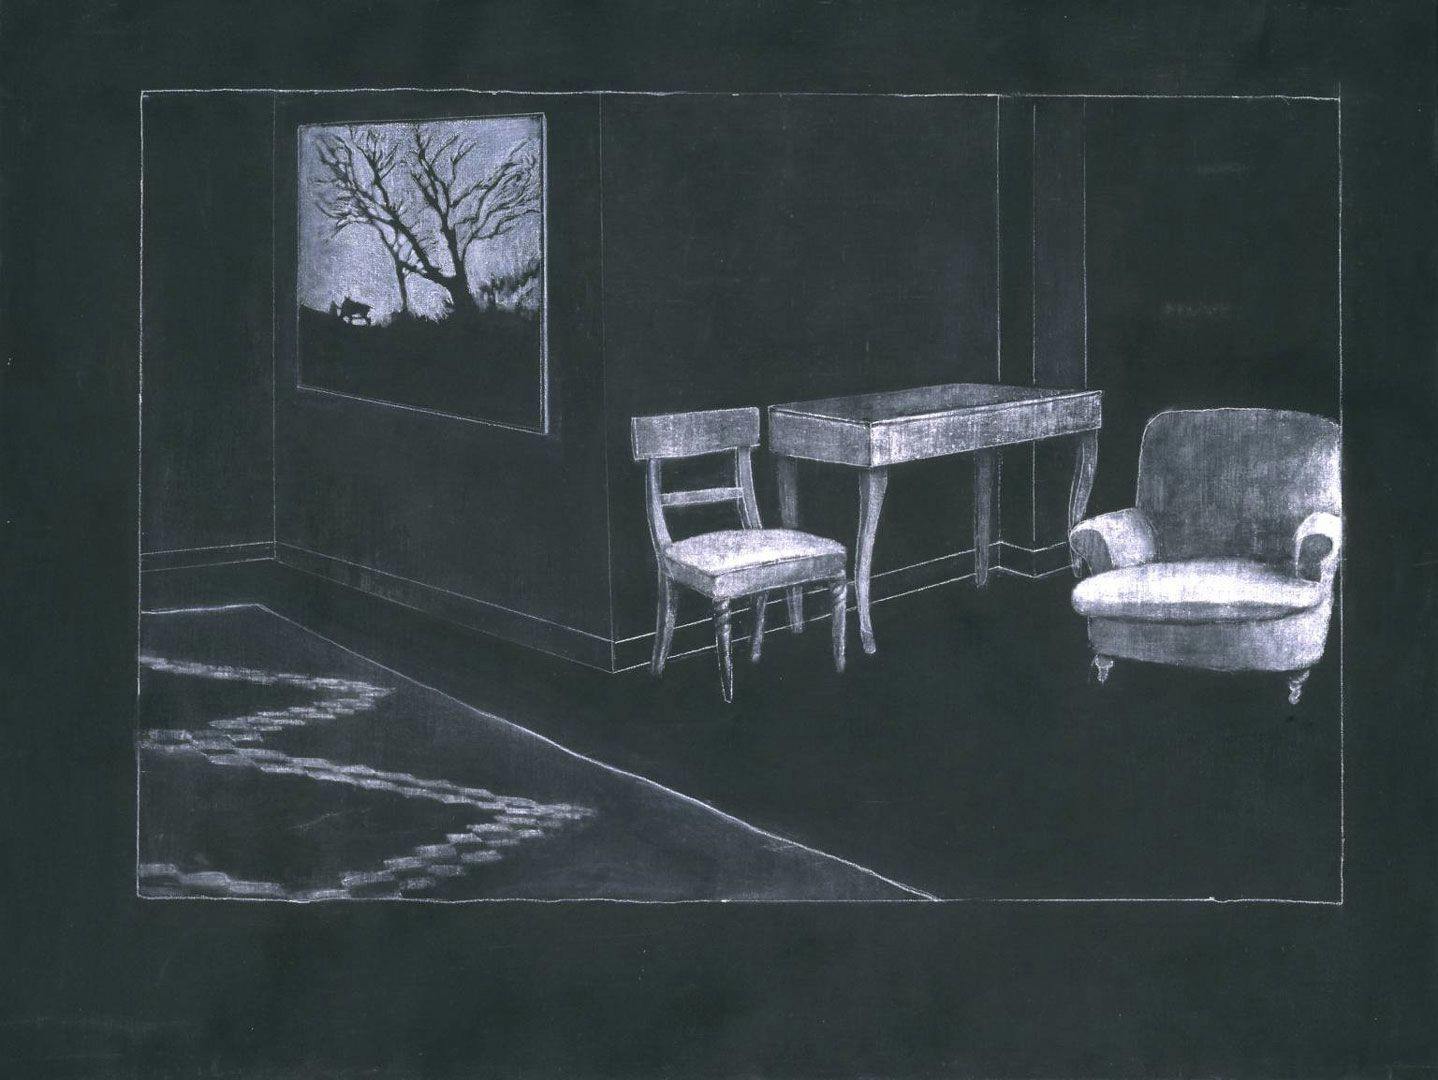 A white drawing on black paper by Juan Muñoz, titled Raincoat Drawing, dated 1989.